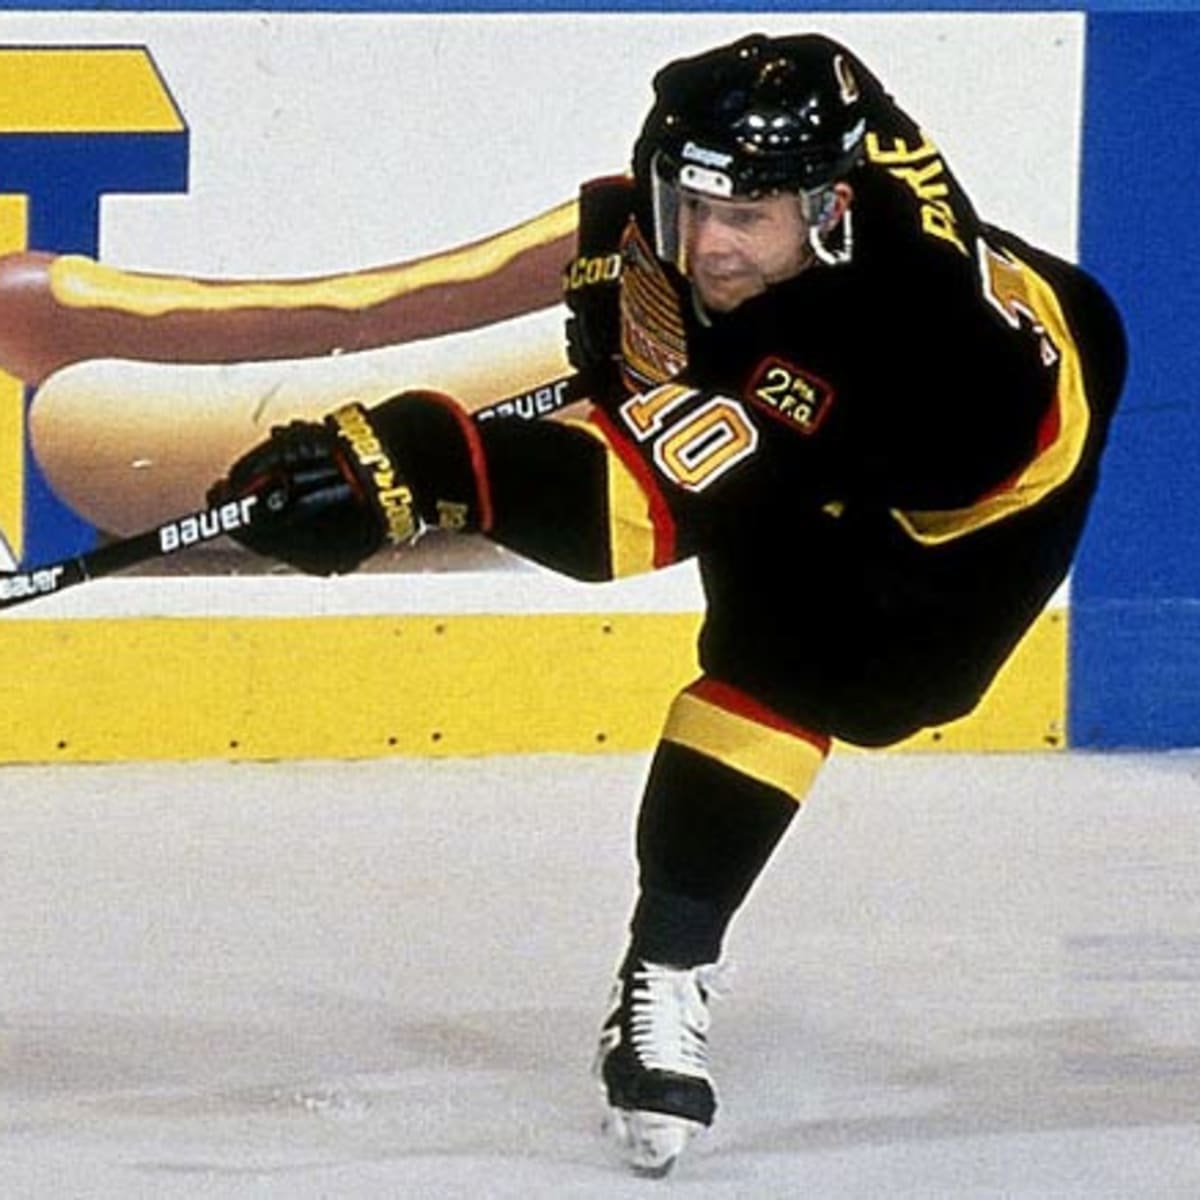 File:Pavel Bure in Canucks uniform (cropped1).jpg - Wikimedia Commons